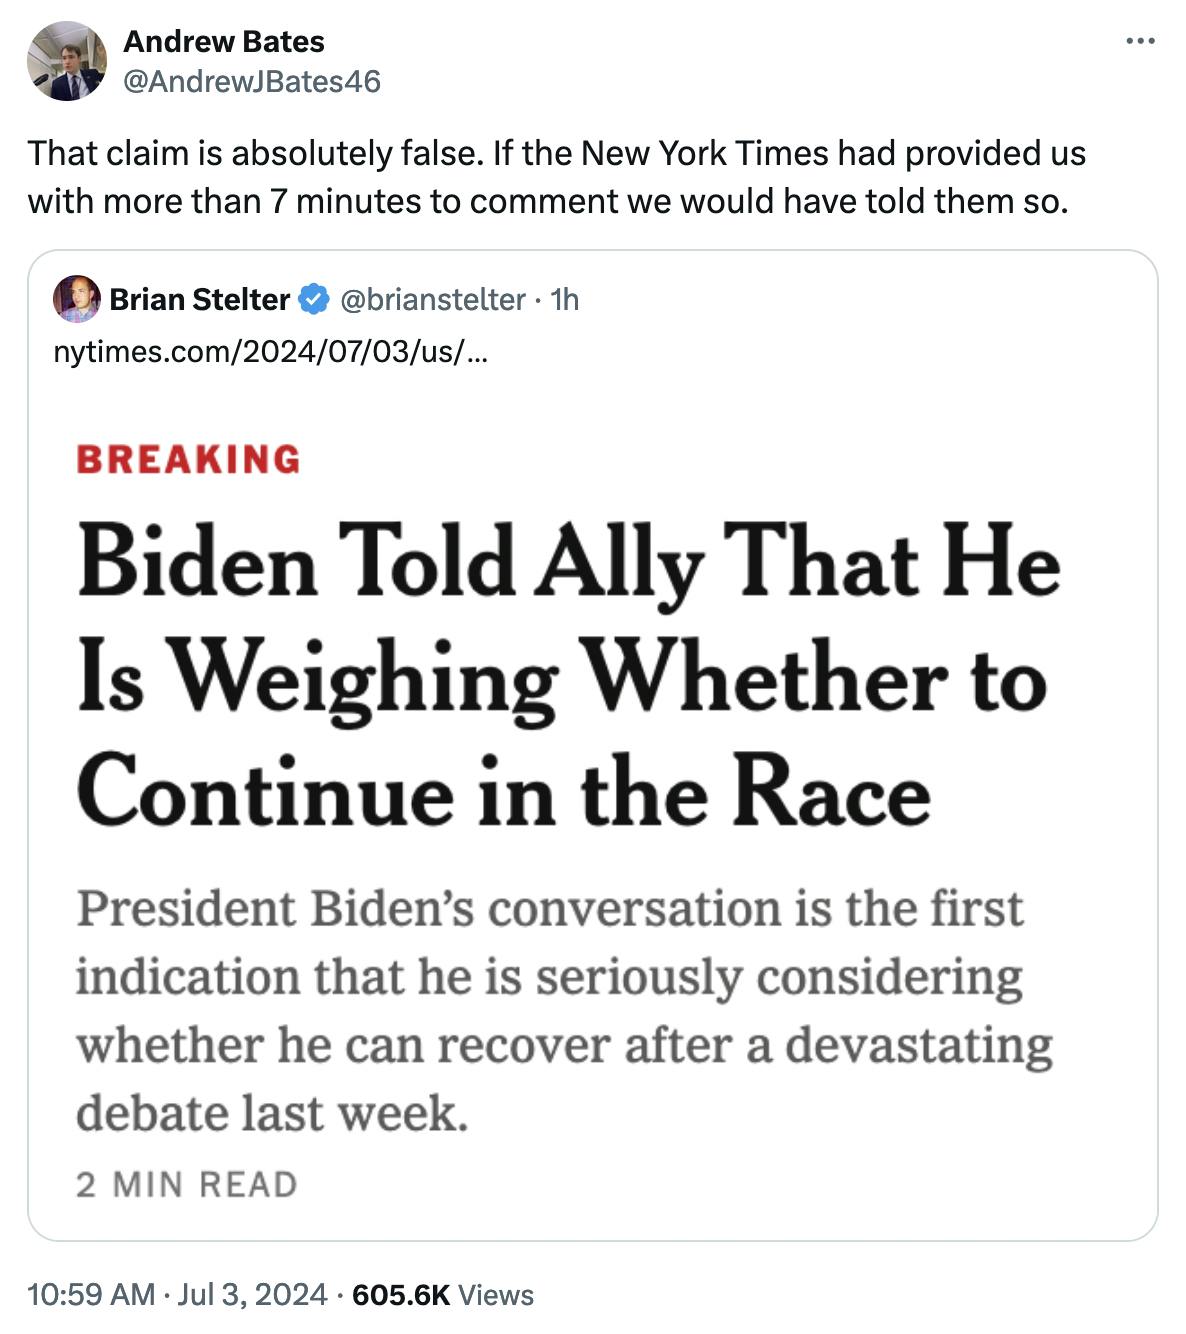 Twitter Screenshot Andrew Bates @AndrewJBates46: That claim is absolutely false. If the New York Times had provided us with more than 7 minutes to comment we would have told them so.